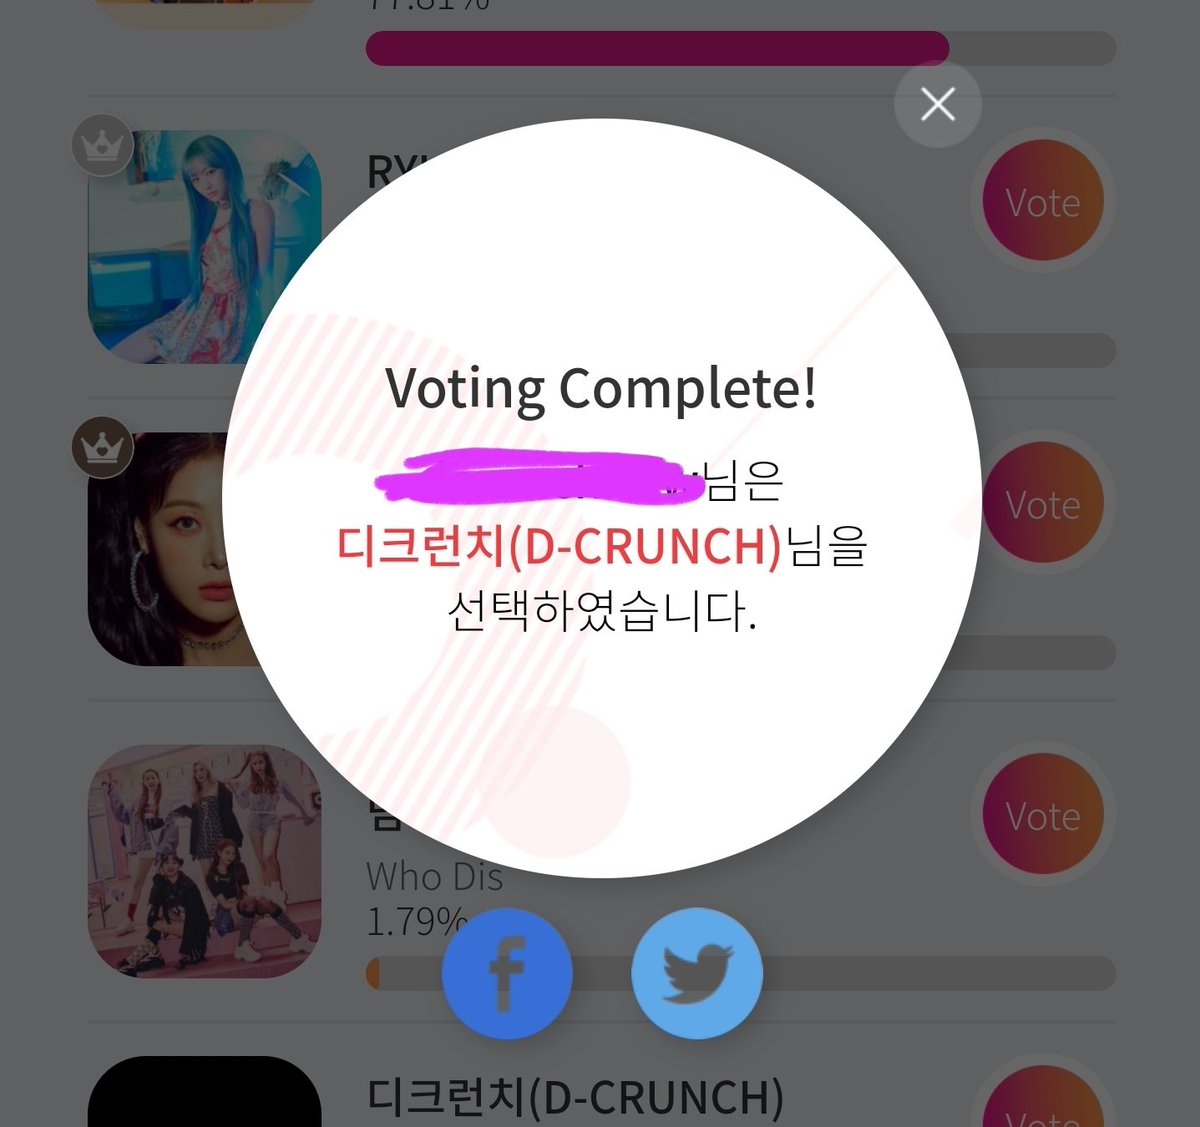 You will get this pop up which confirms your vote!!! It is very simple, haply voting everyone!! DON'T FORGET THAT YOU CAN WATCH 5 ADS PER HOUR, WHICH EQUALS 5 VOTES AFTER CONVERSION SO YOU CAN SUBMIT 5 VOTES PER HOUR FOR FREE!! LET'S DO THIS DIANAS!! #D_CRUNCH  #디크런치